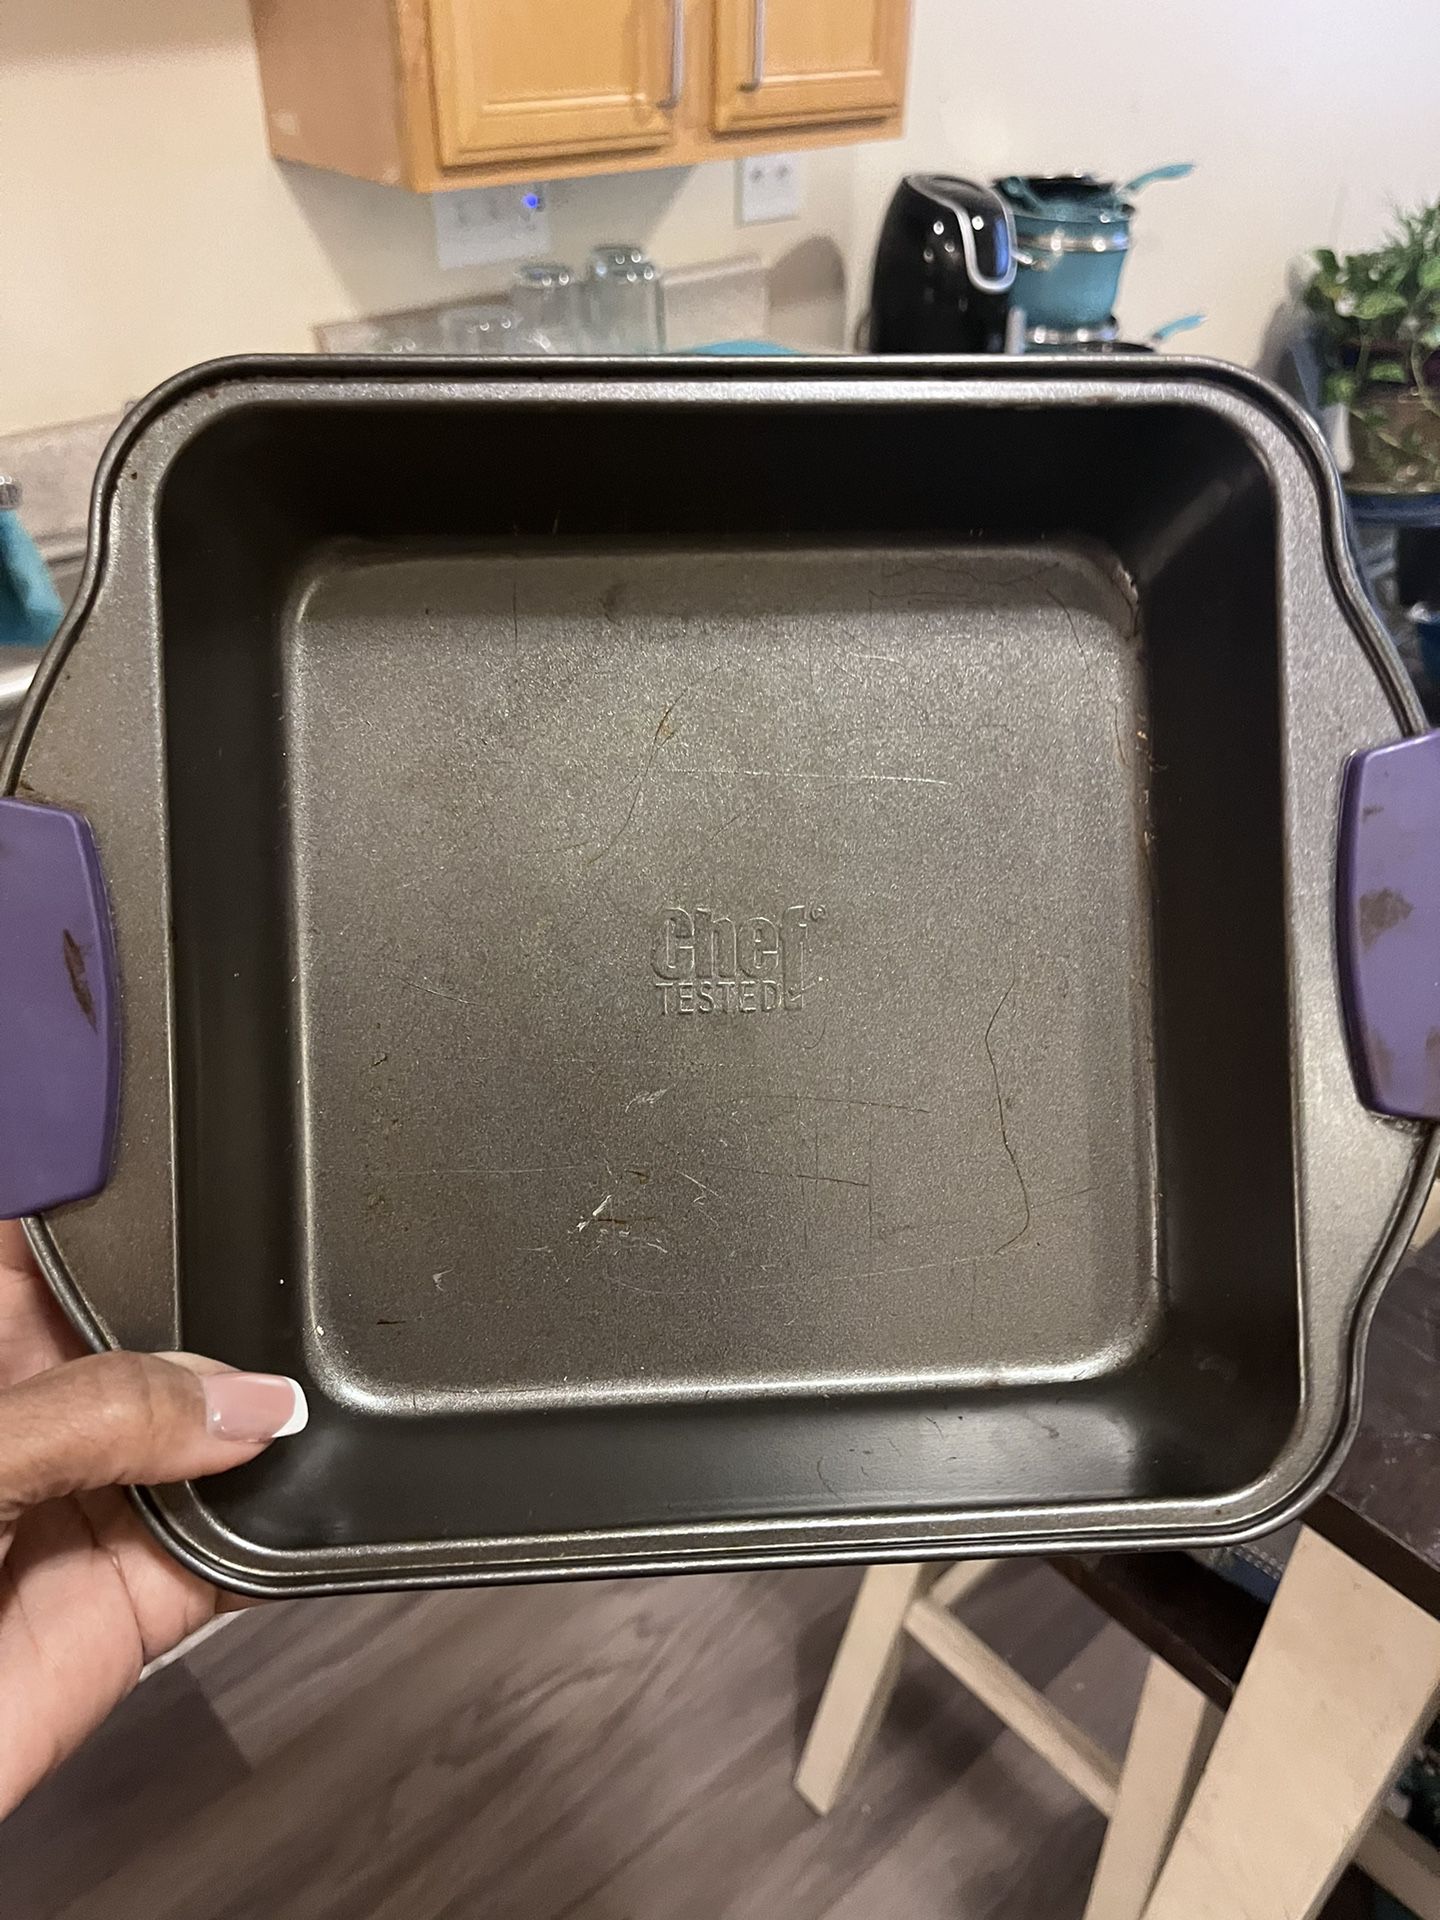 Chef Tested Square Pans And Rectangular Pan